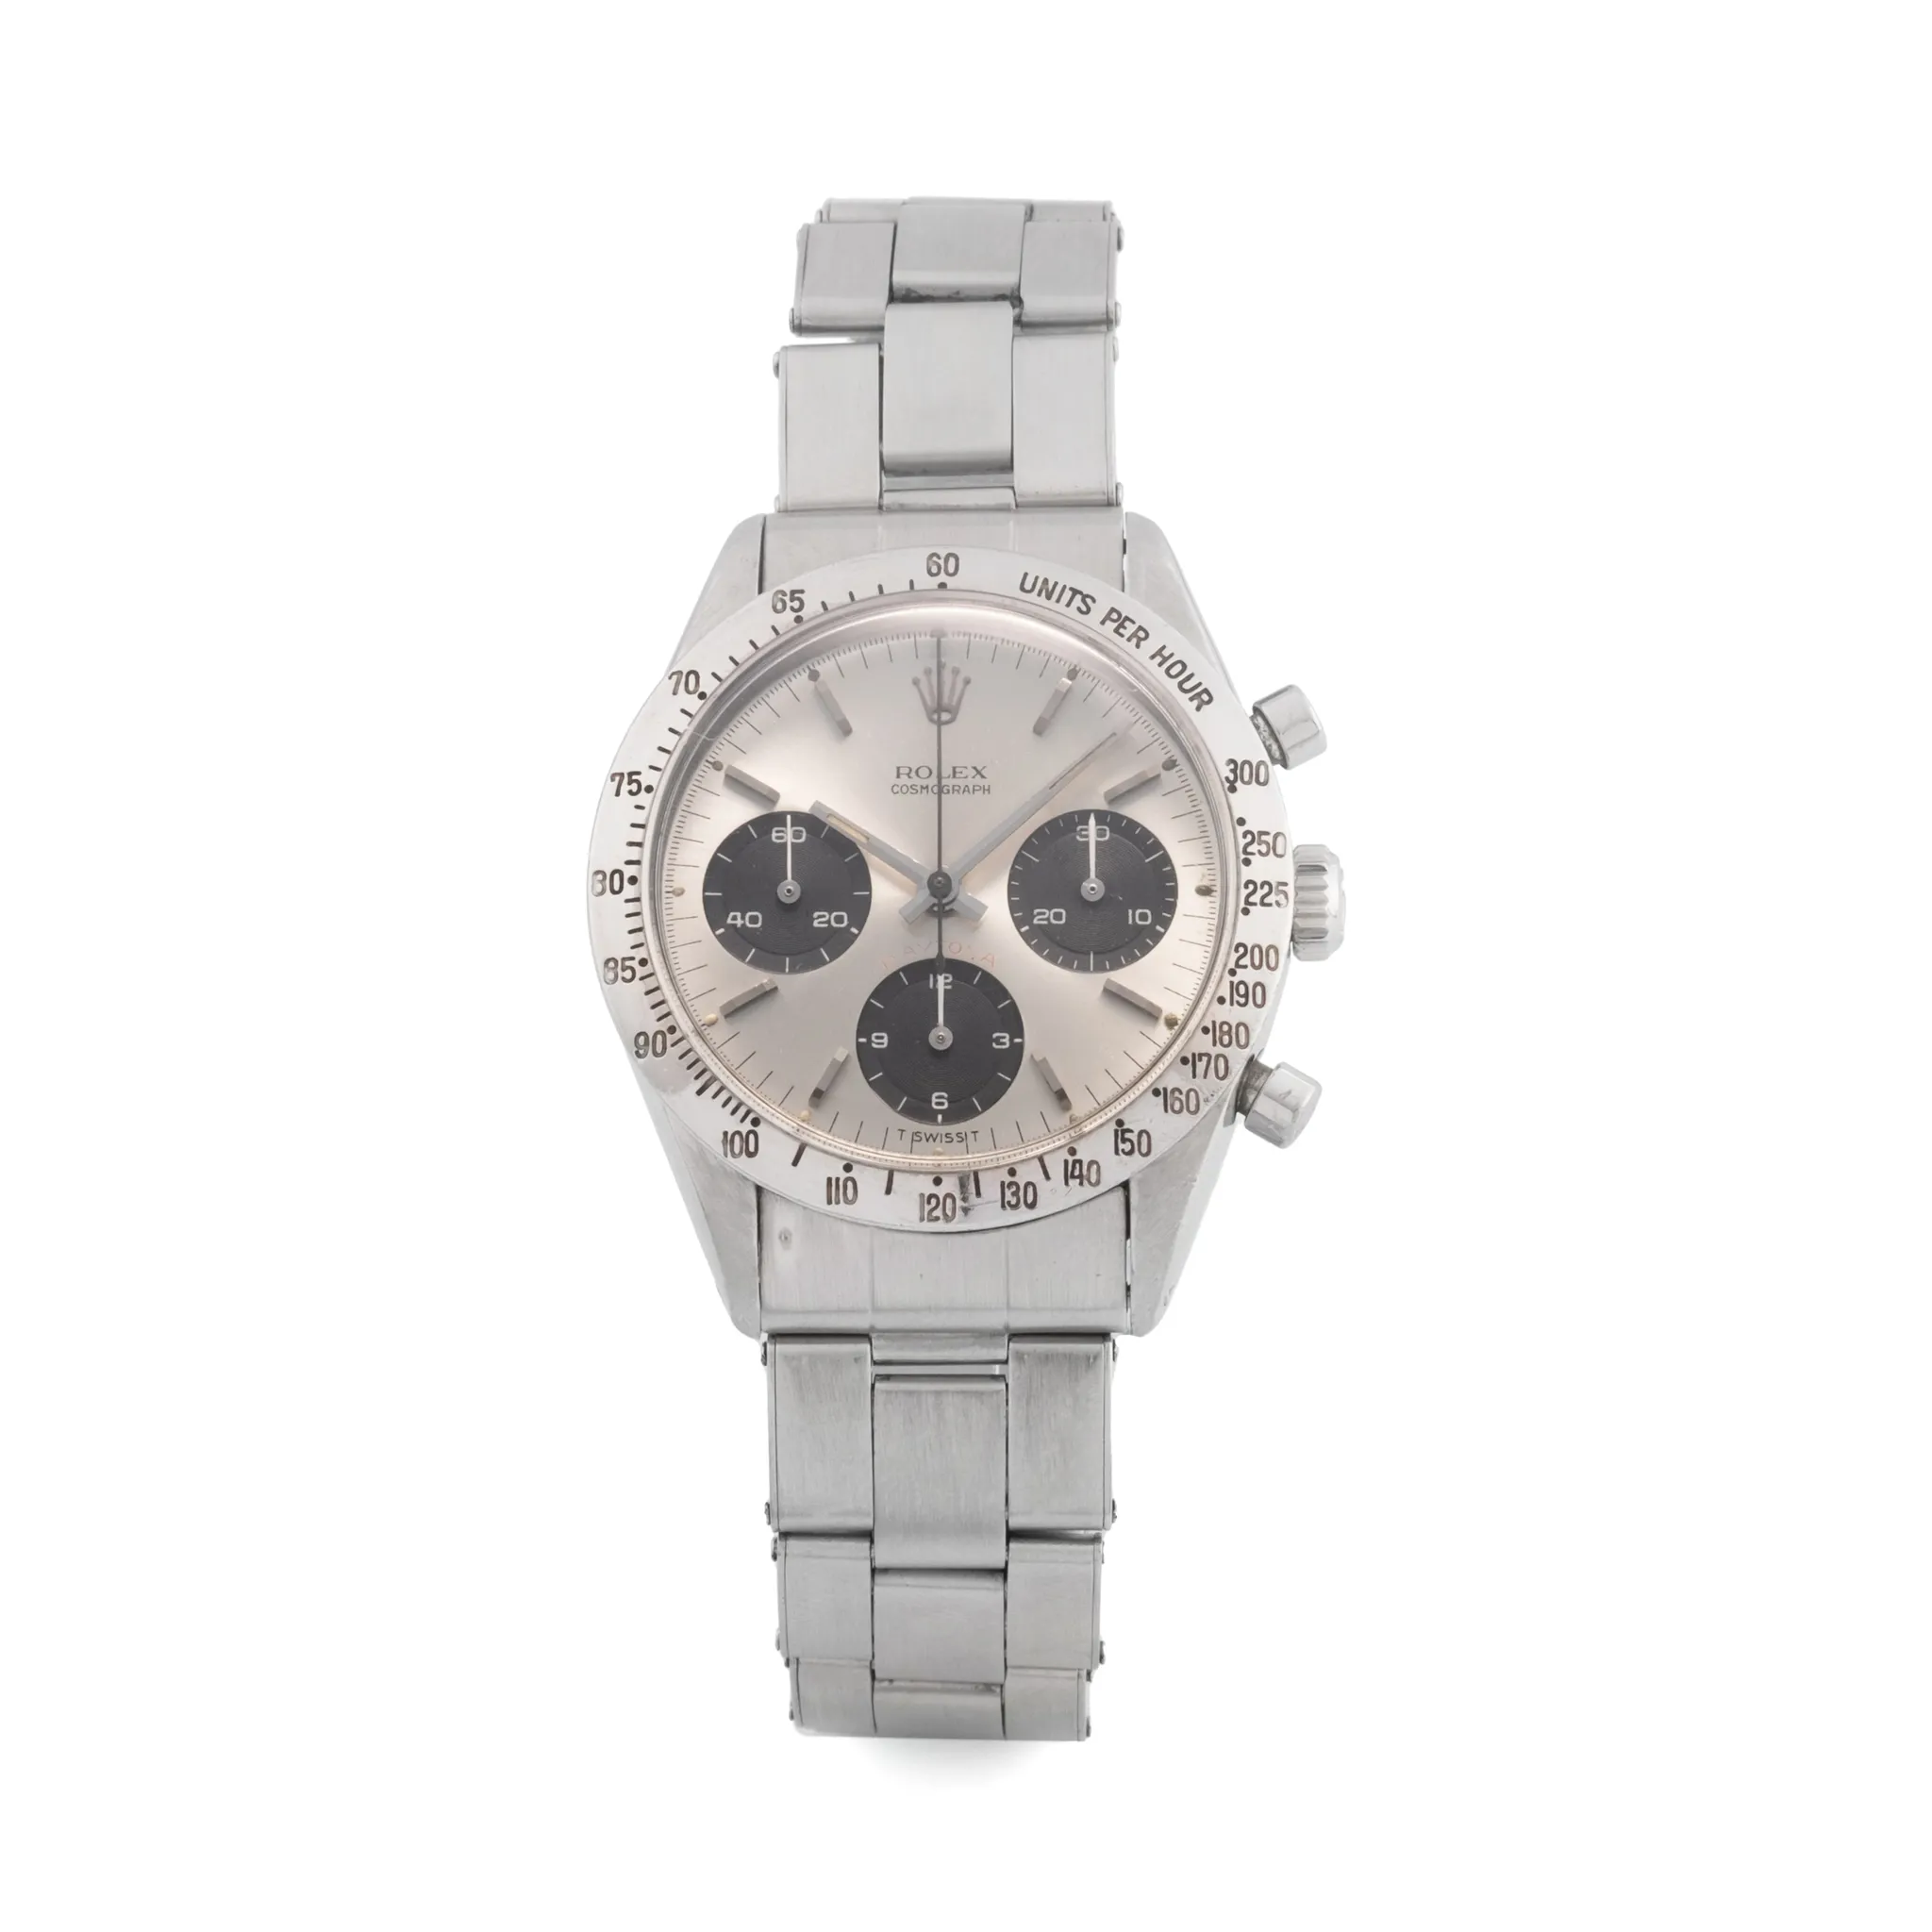 Rolex Daytona 6239 36mm Stainless steel bi-color black and silver